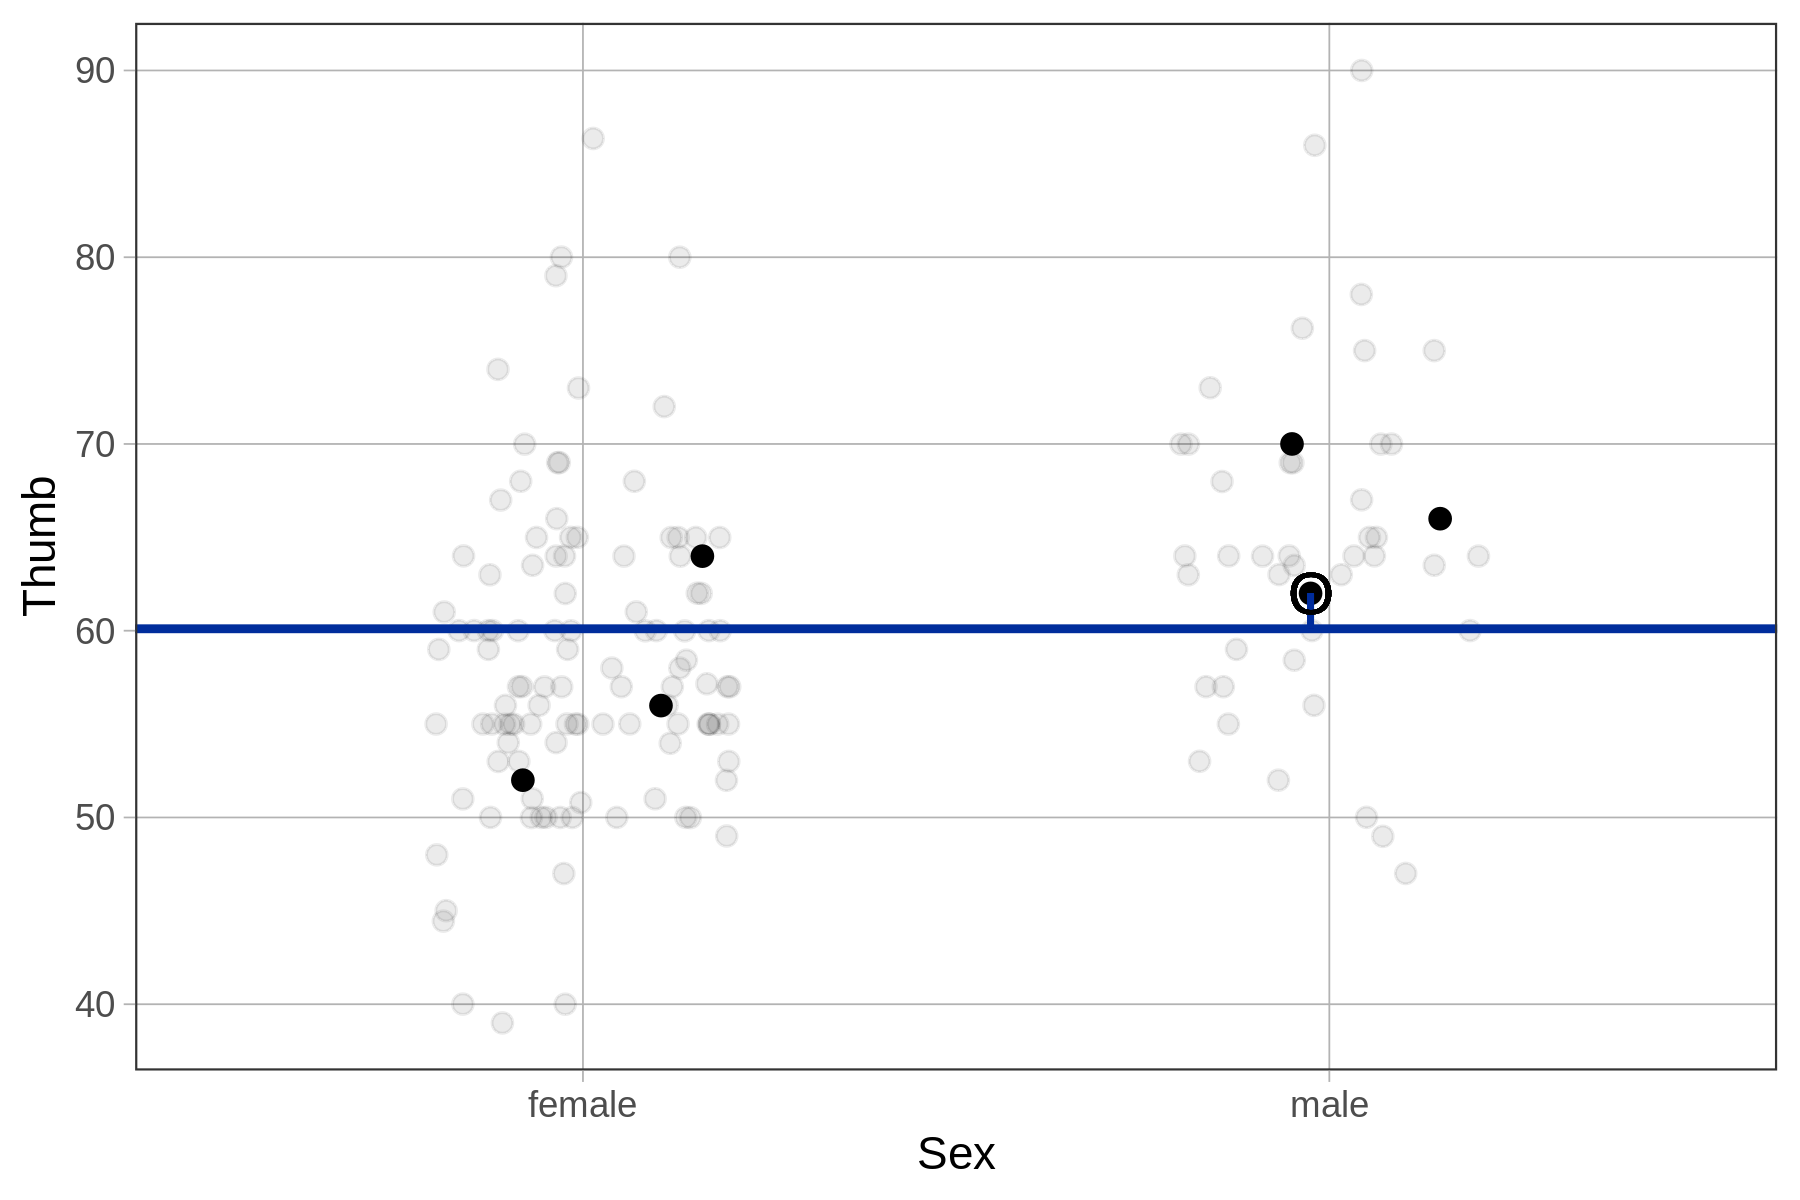 On the left, a jitter plot of the distribution of Thumb by Sex, overlaid with a horizontal line in blue showing the empty model for Thumb. A single residual in the male group is drawn above the empty model as a vertical line from the data point to the model.